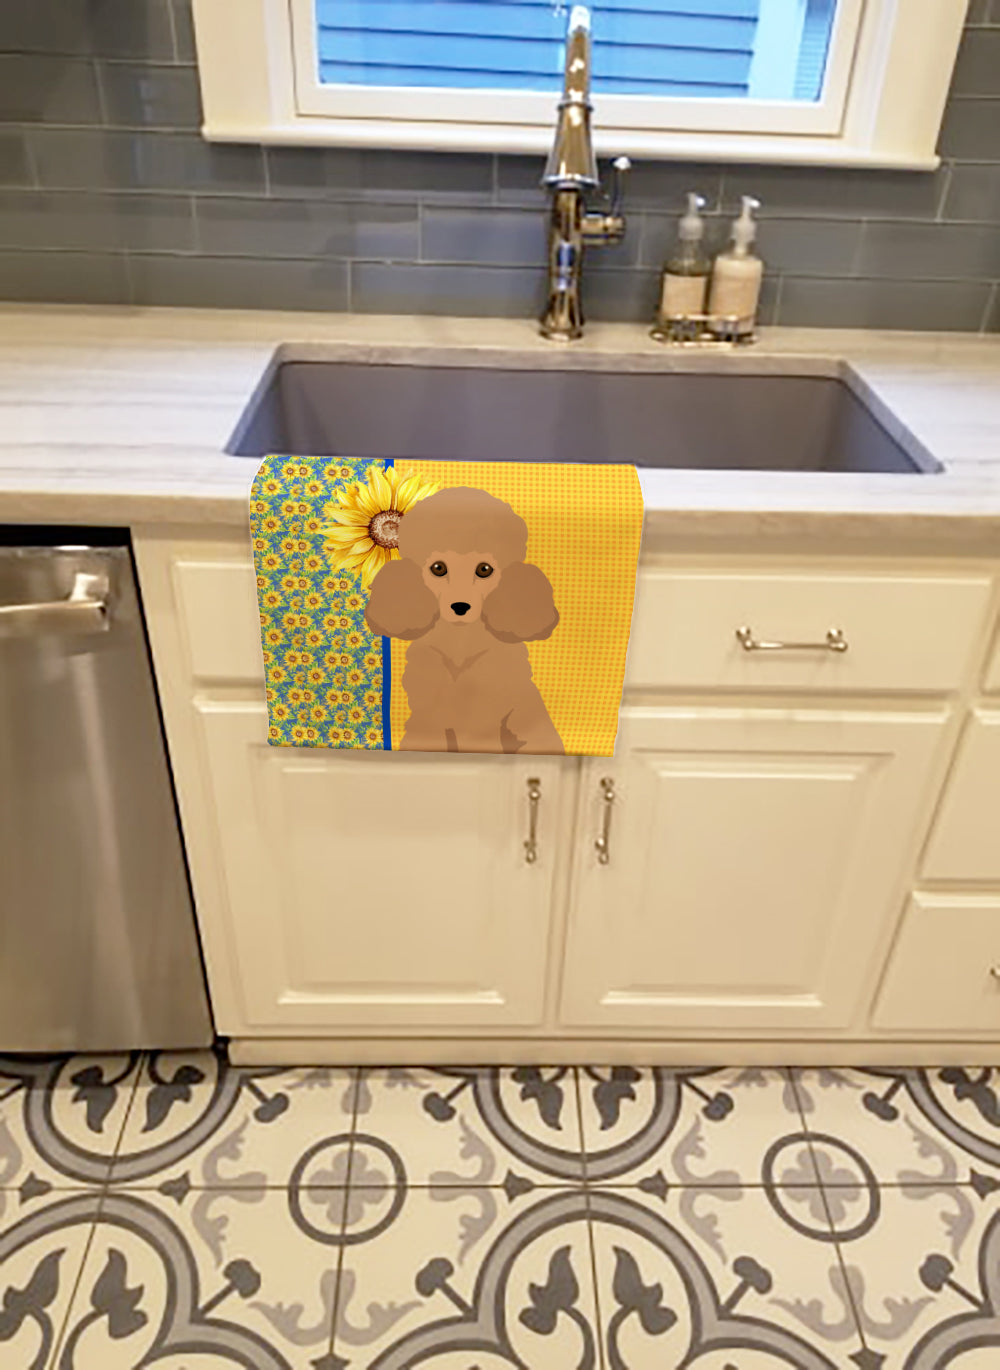 Buy this Summer Sunflowers Toy Apricot Poodle Kitchen Towel